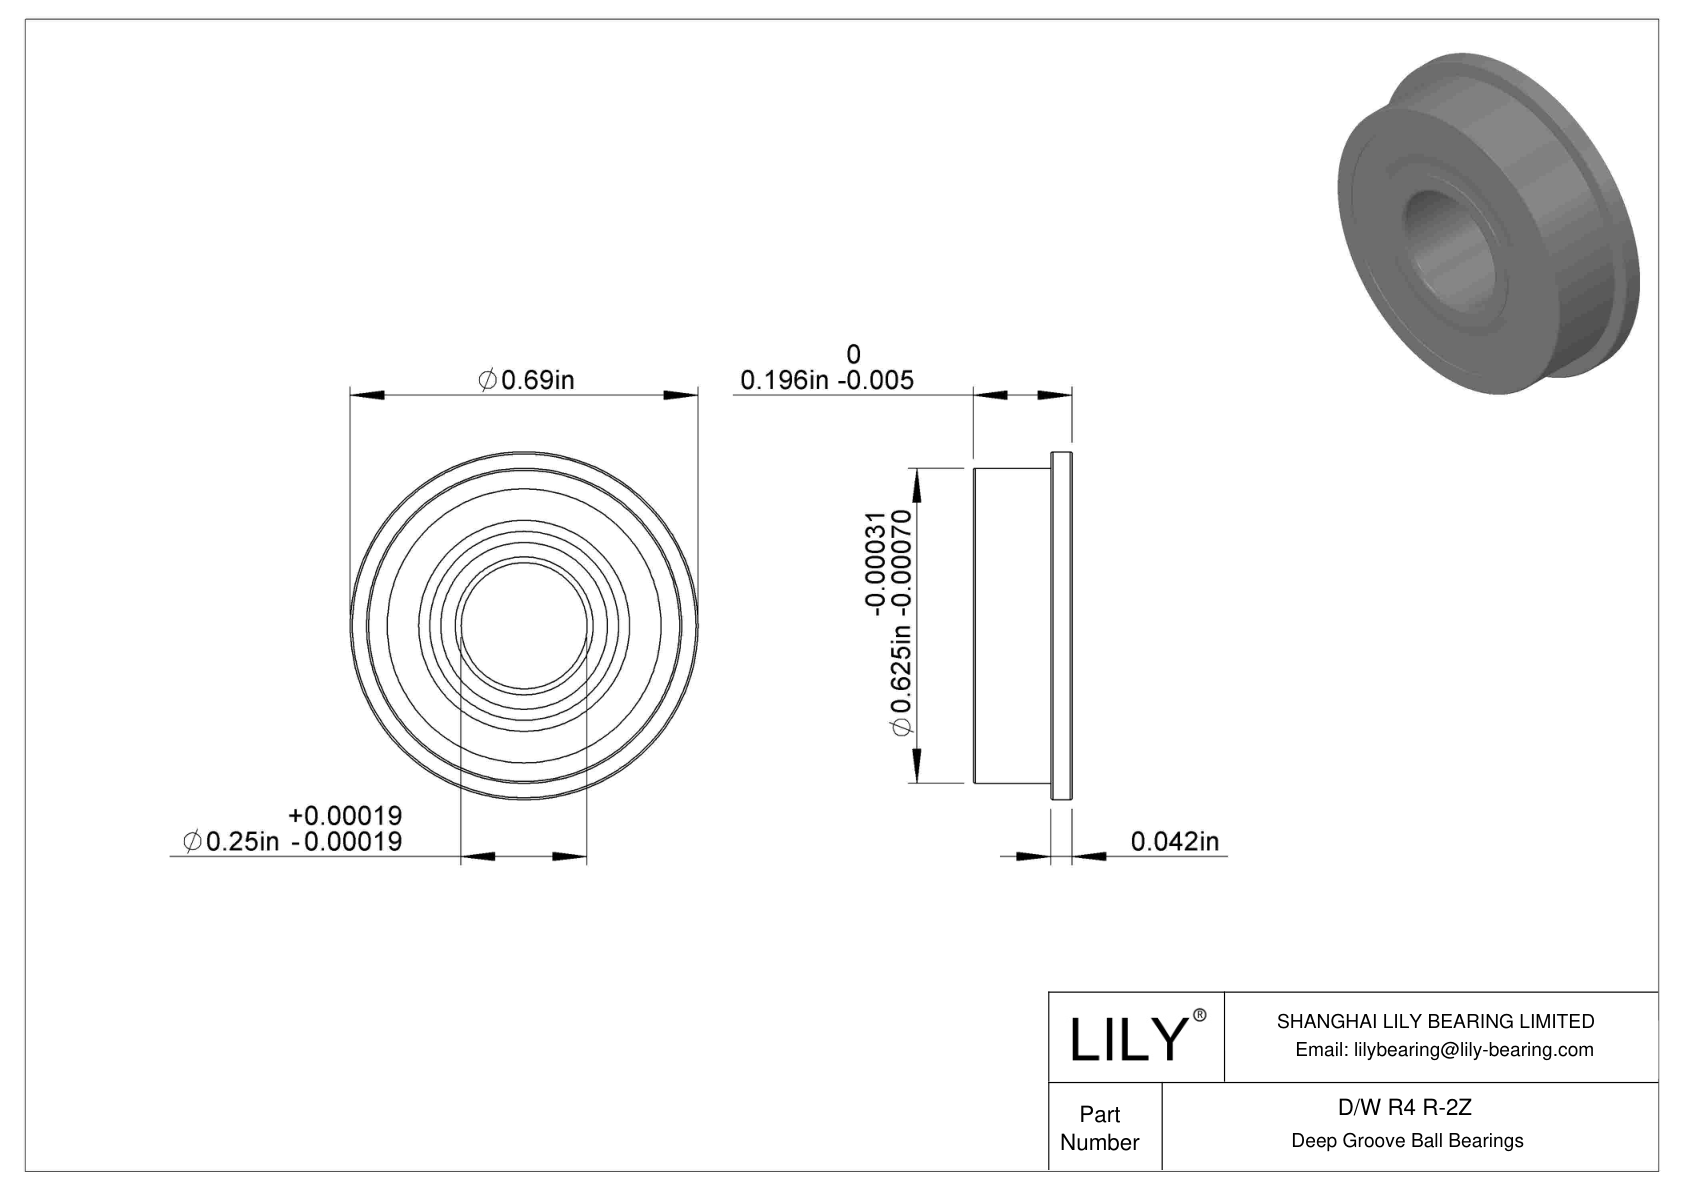 D/W R4 R-2Z Flanged Ball Bearings cad drawing